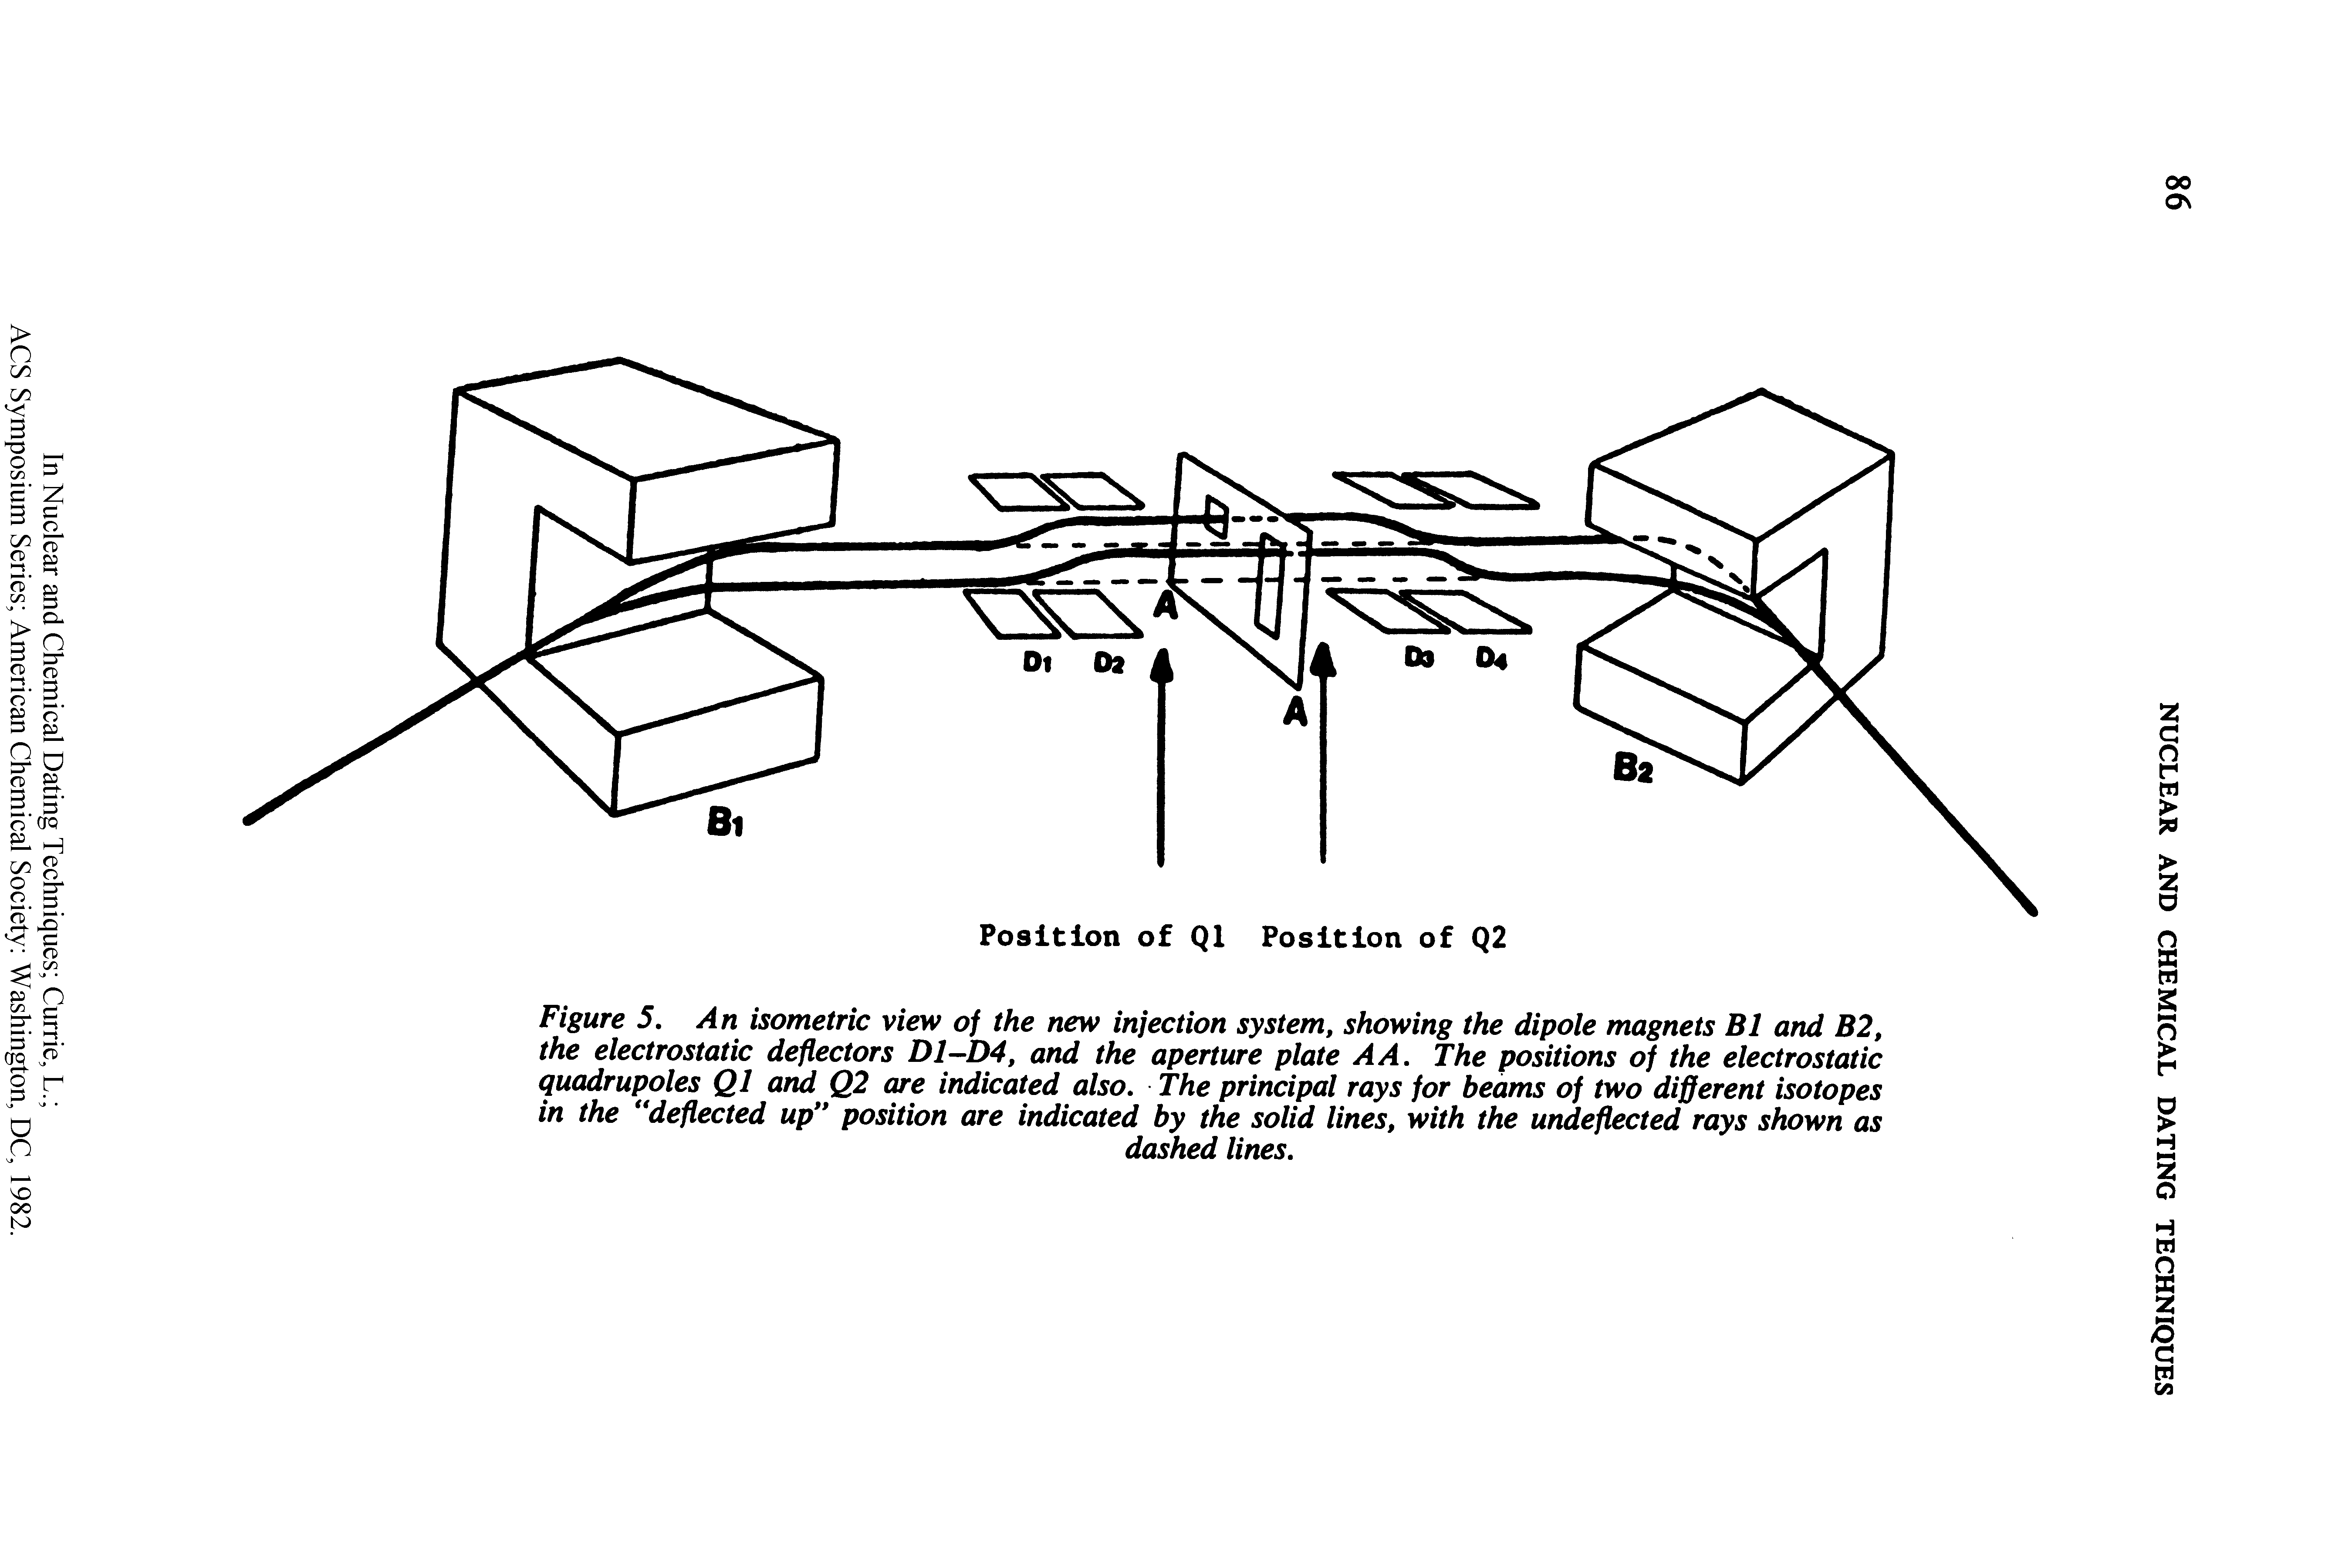 Figure 5. An isometric view of the new injection system, showing the dipole magnets B1 and B2, the electrostatic deflectors D1-D4, and the aperture plate A A. The positions of the electrostatic quadrupoles Q1 and Q2 are indicated also. The principal rays for beams of two different isotopes in the deflected up position are indicated by the solid lines, with the undeflected rays shown as...